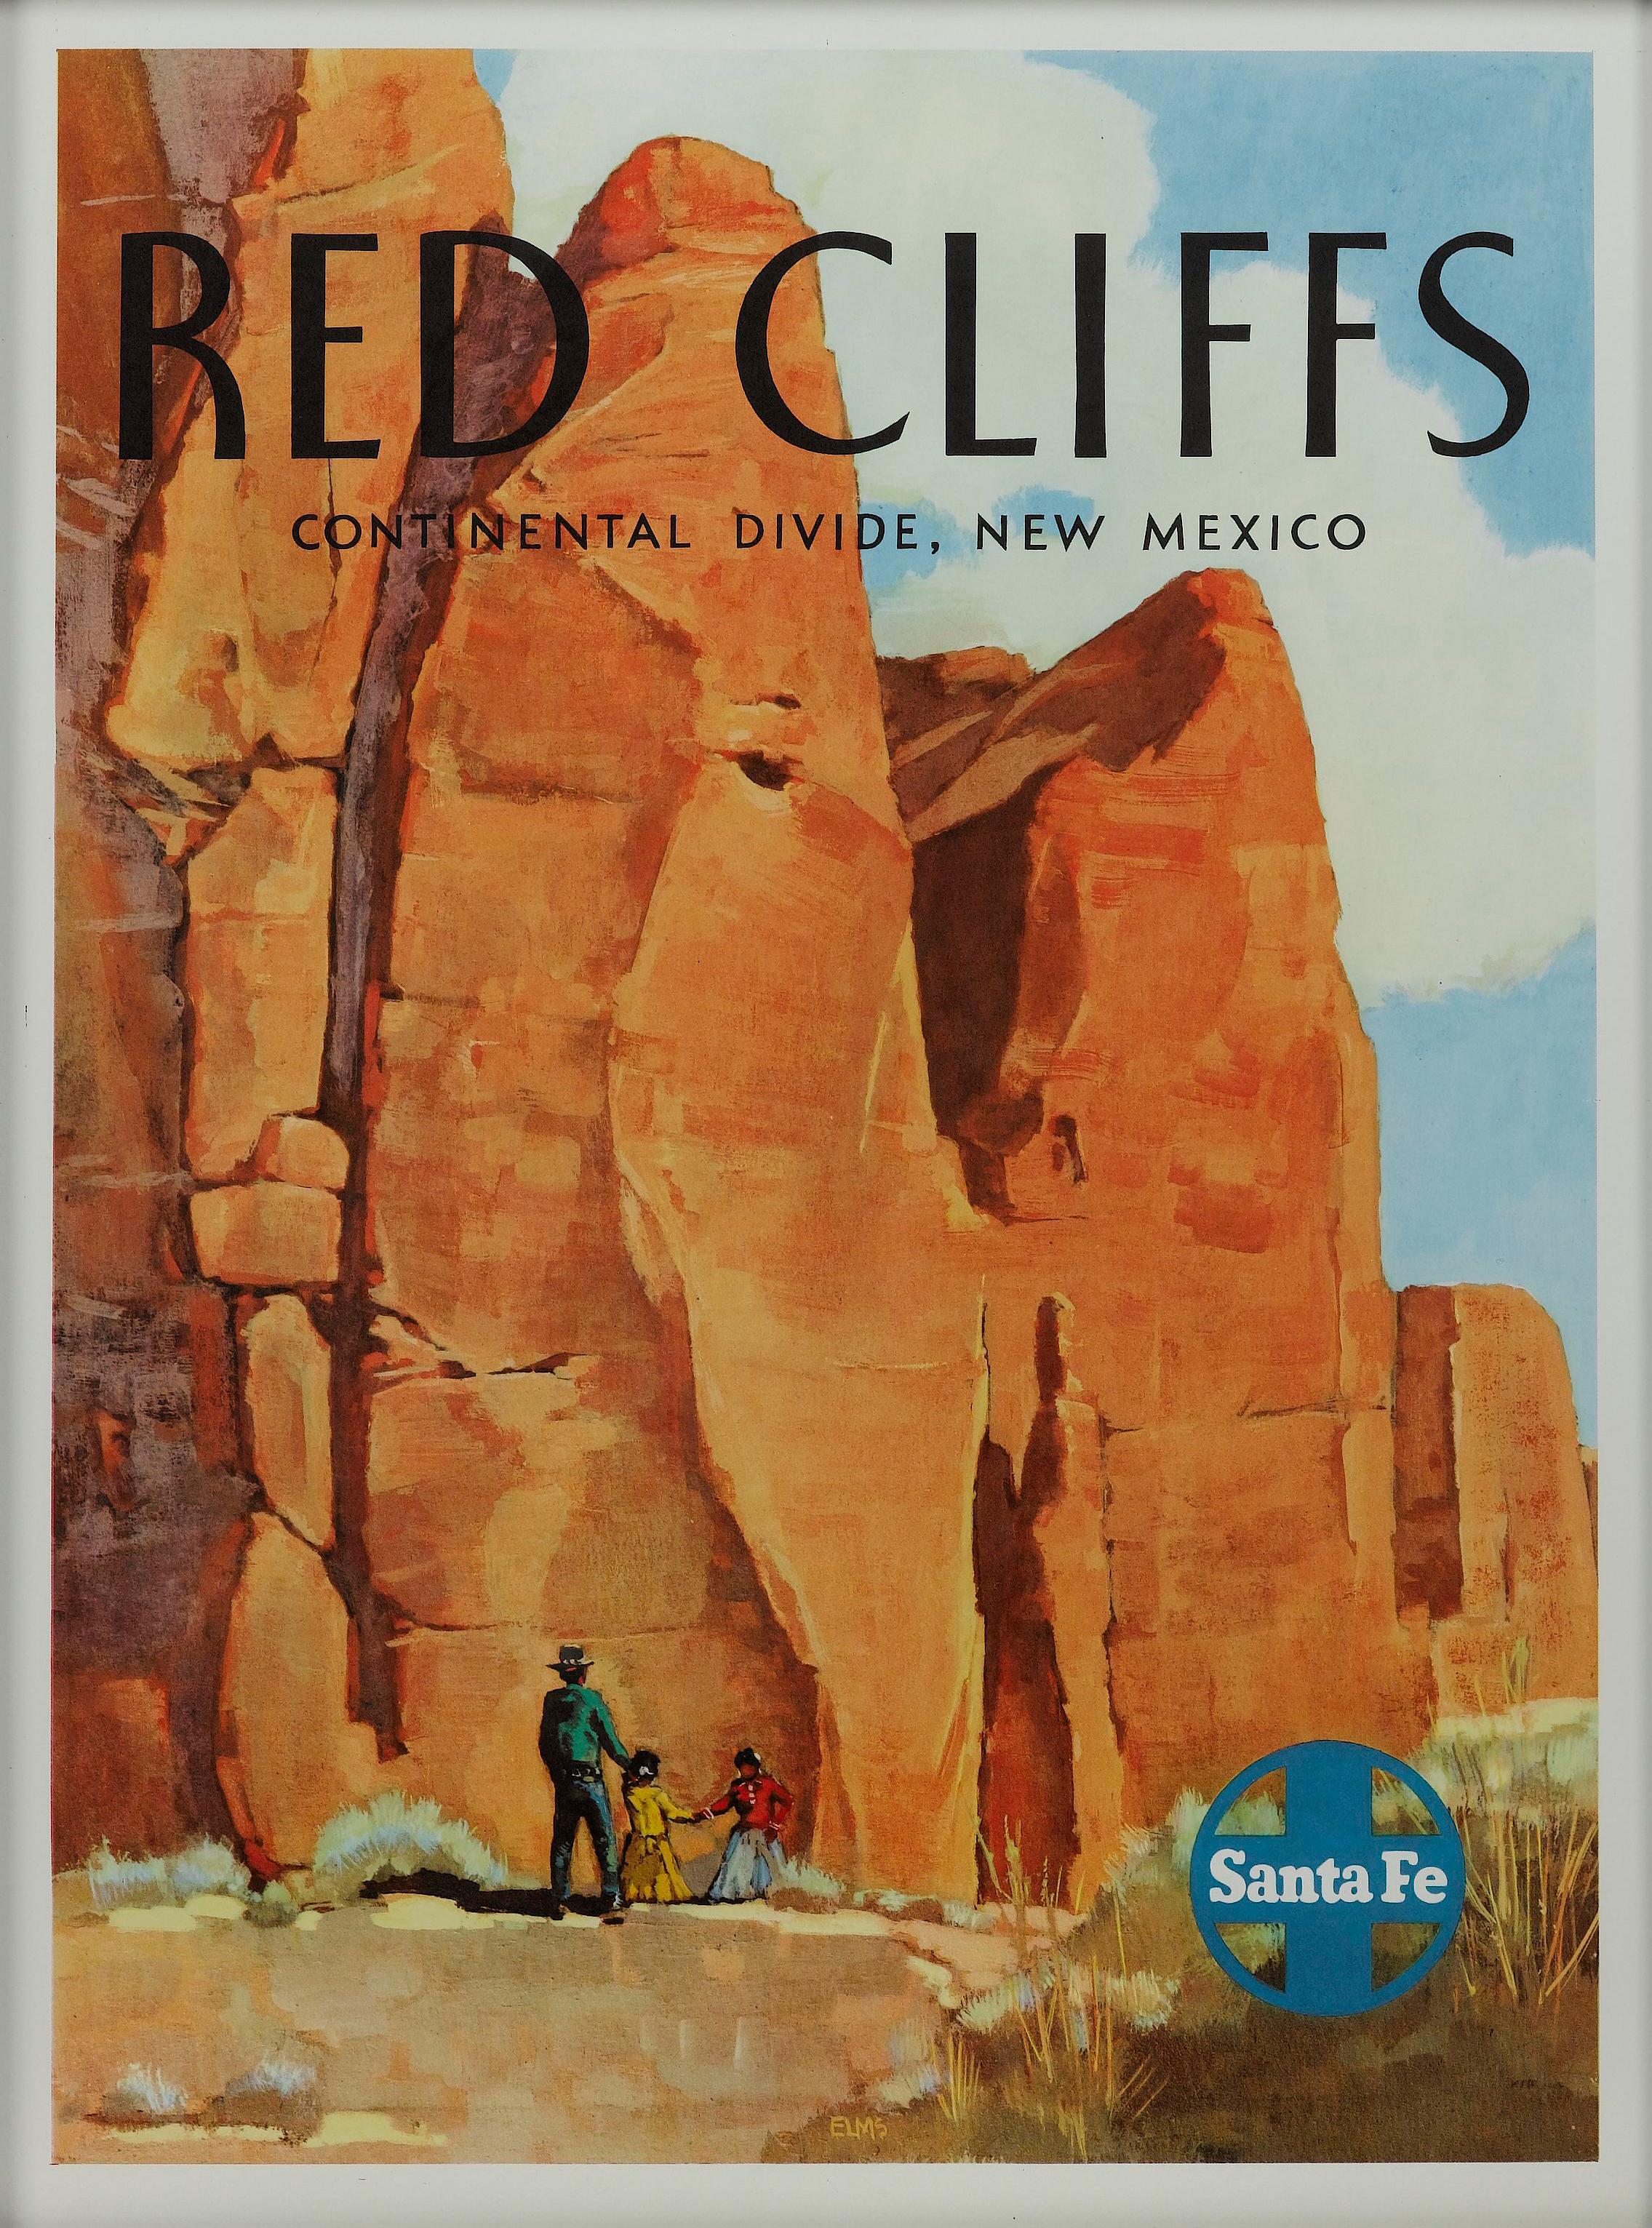 Presented is a vintage poster of Red Cliffs Continental Divide by Frederick Elms, produced for the Santa Fe Railway. The poster depicts a family, dwarfed by the stunning Red Cliffs of the southern end of the Continental Divide in New Mexico. The